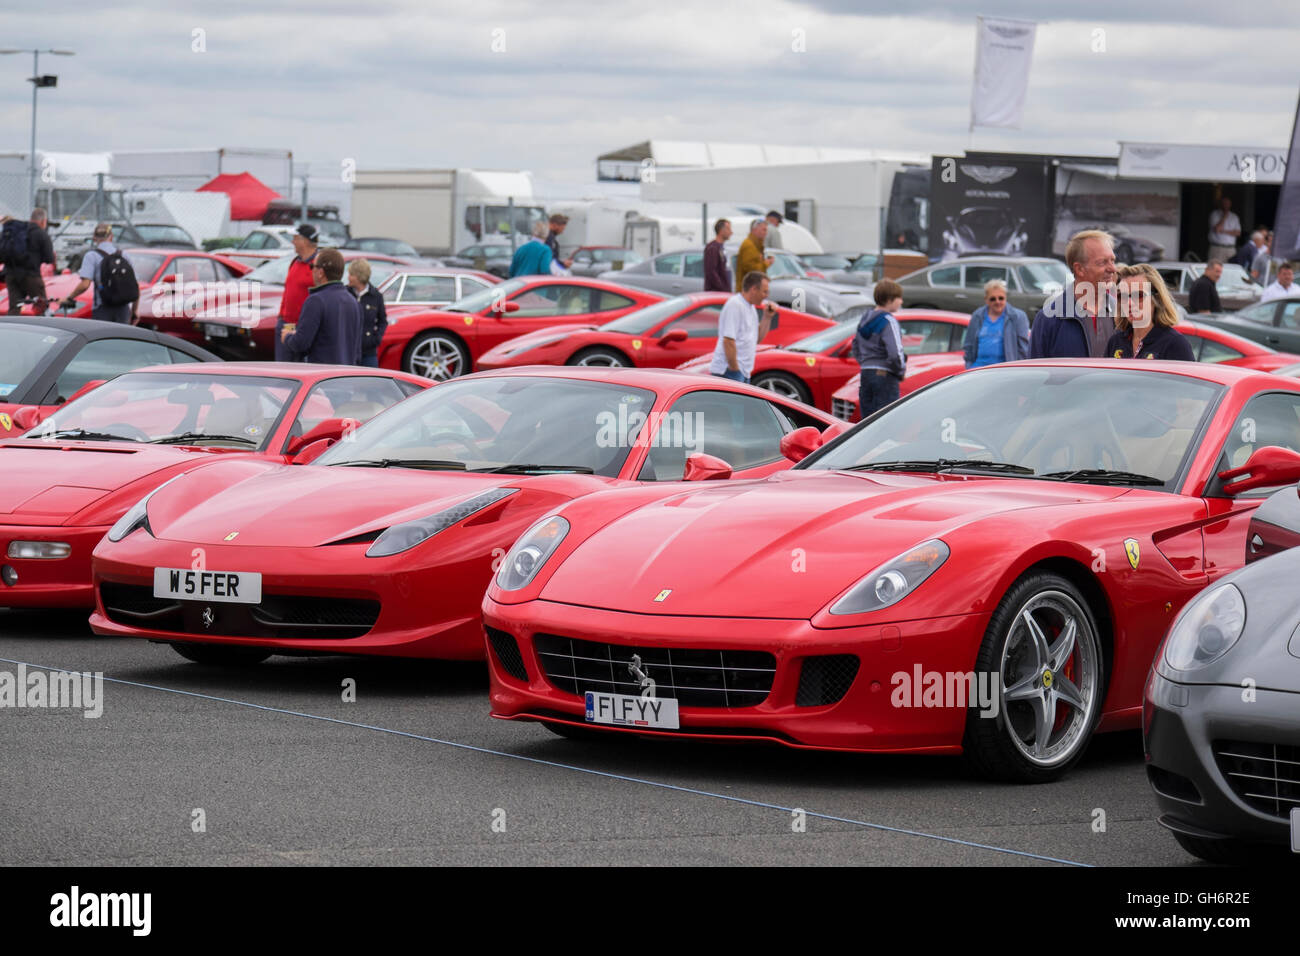 Ferrari sports cars lined up at the Silverstone Classic car event 2016, UK Stock Photo